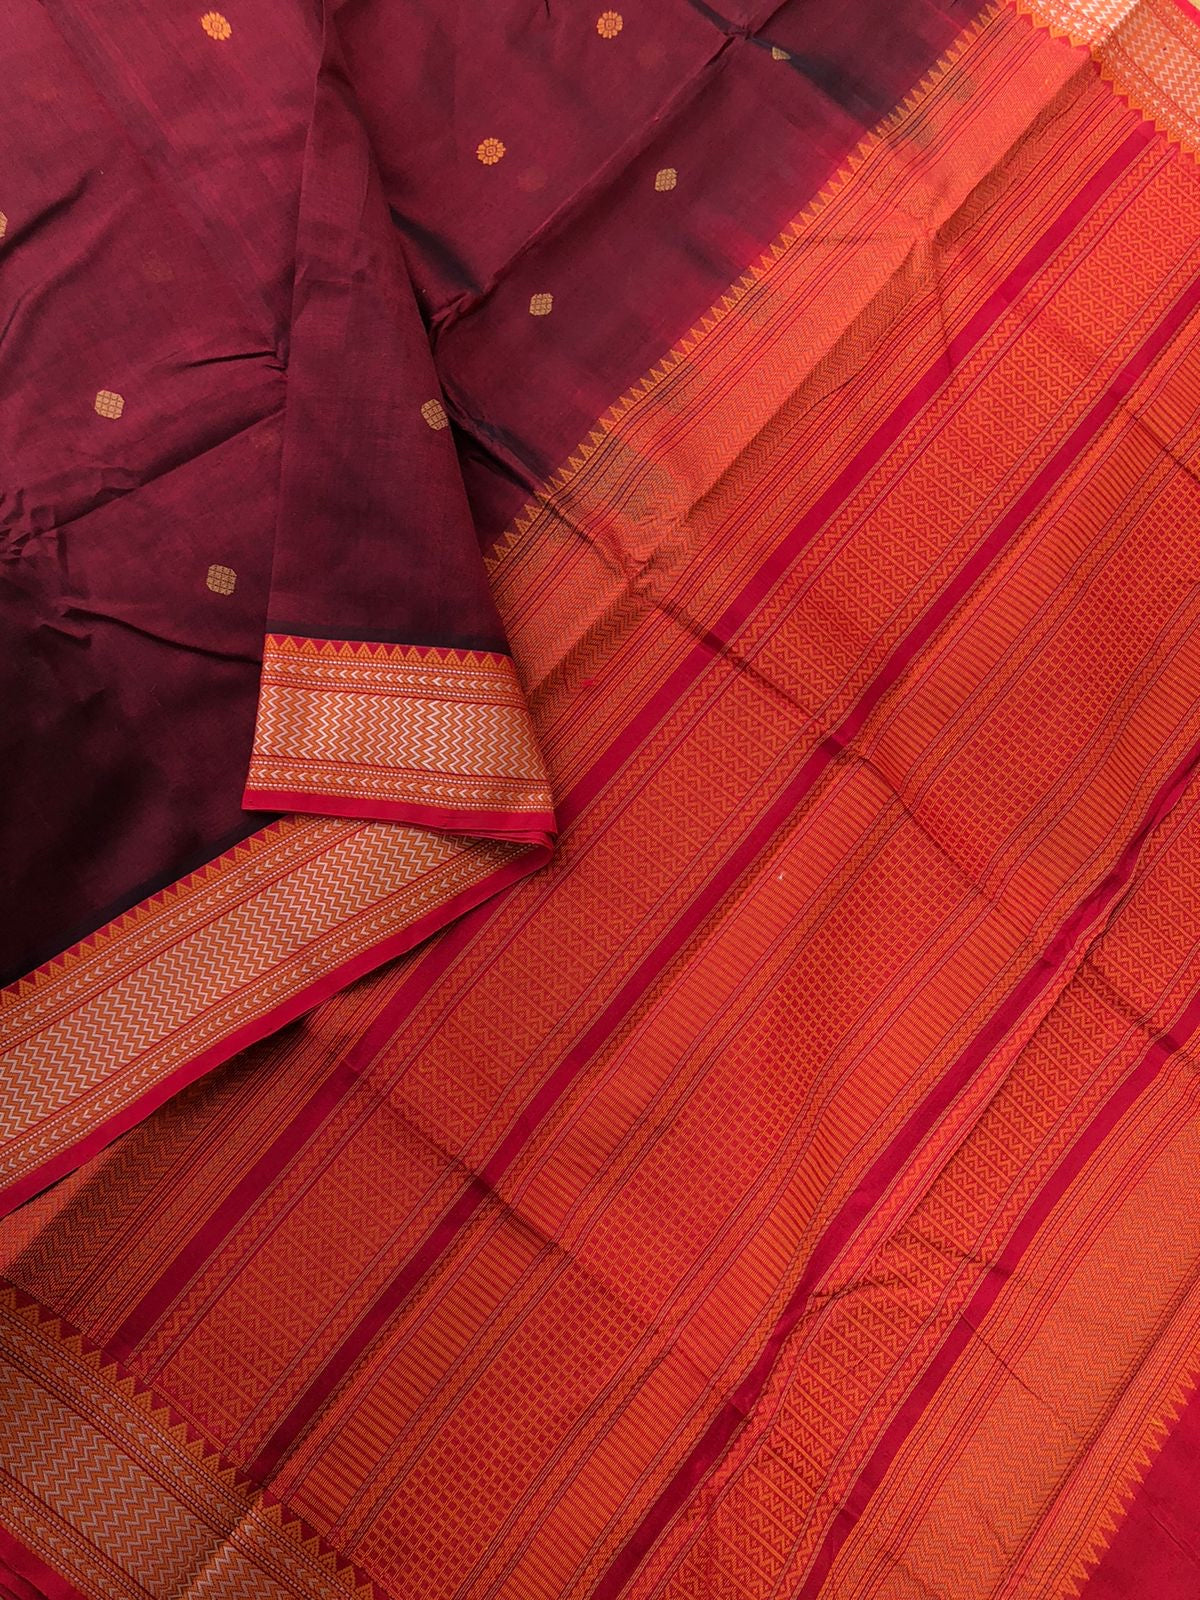 Woven Motifs Silk Cotton - wine maroon and red